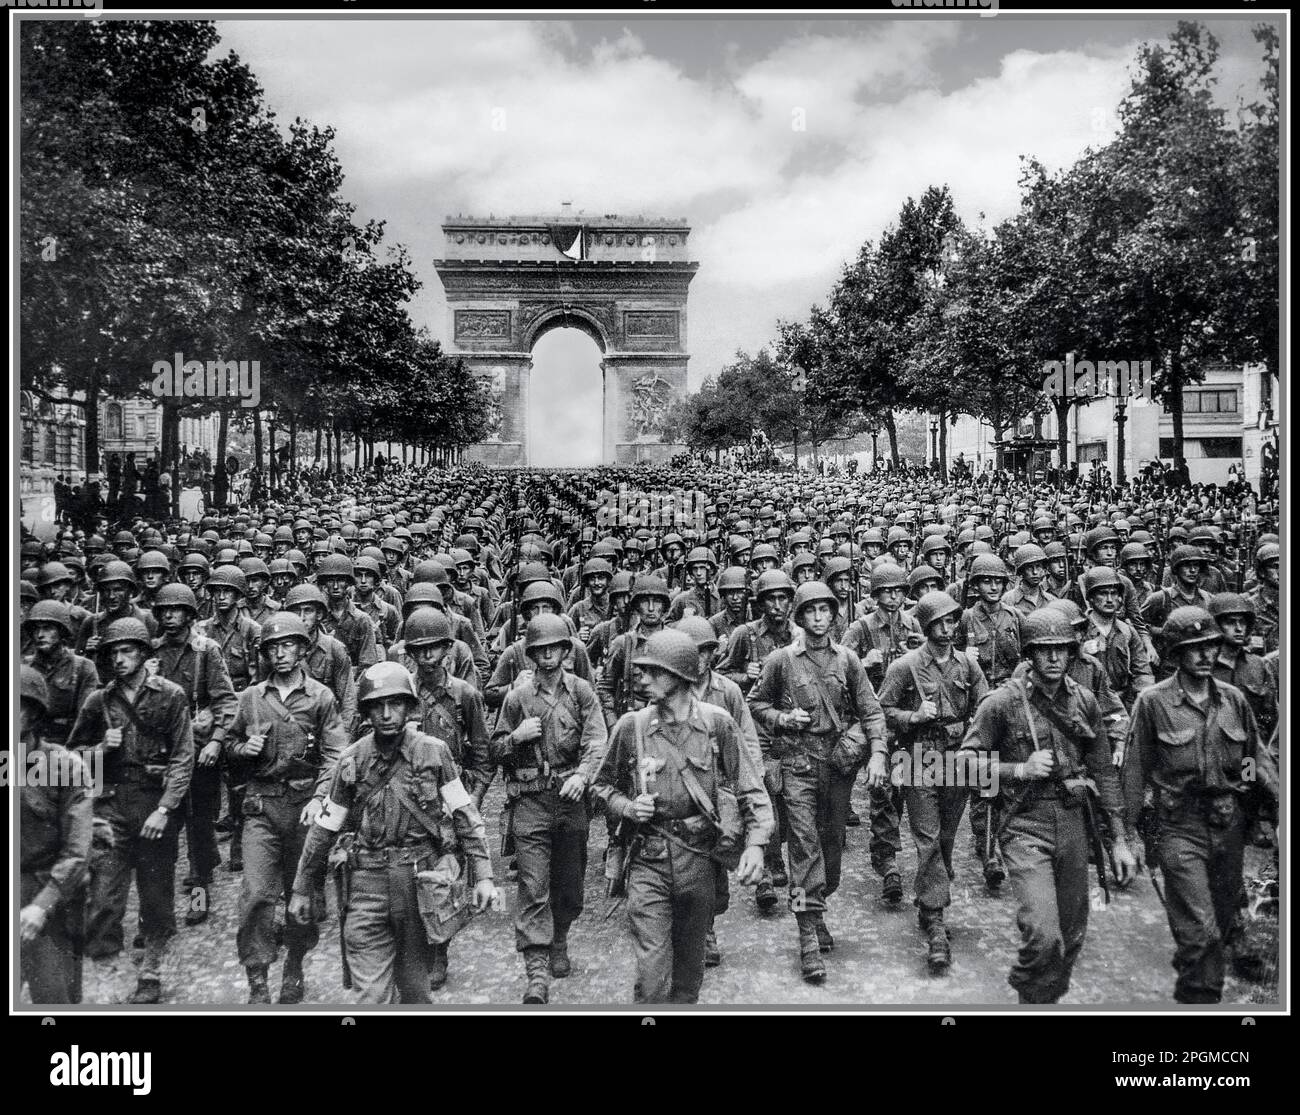 PARIS WW2 VICTORY PARADE ARC DE TRIOMPHE PARIS WW2 VICTORY LIBERATION NAZI GERMANY American troops of the 28th Infantry Division march down the Avenue des Champs-Élysées, Paris, in the `Victory' Parade. Date 29 August 1944 Stock Photo